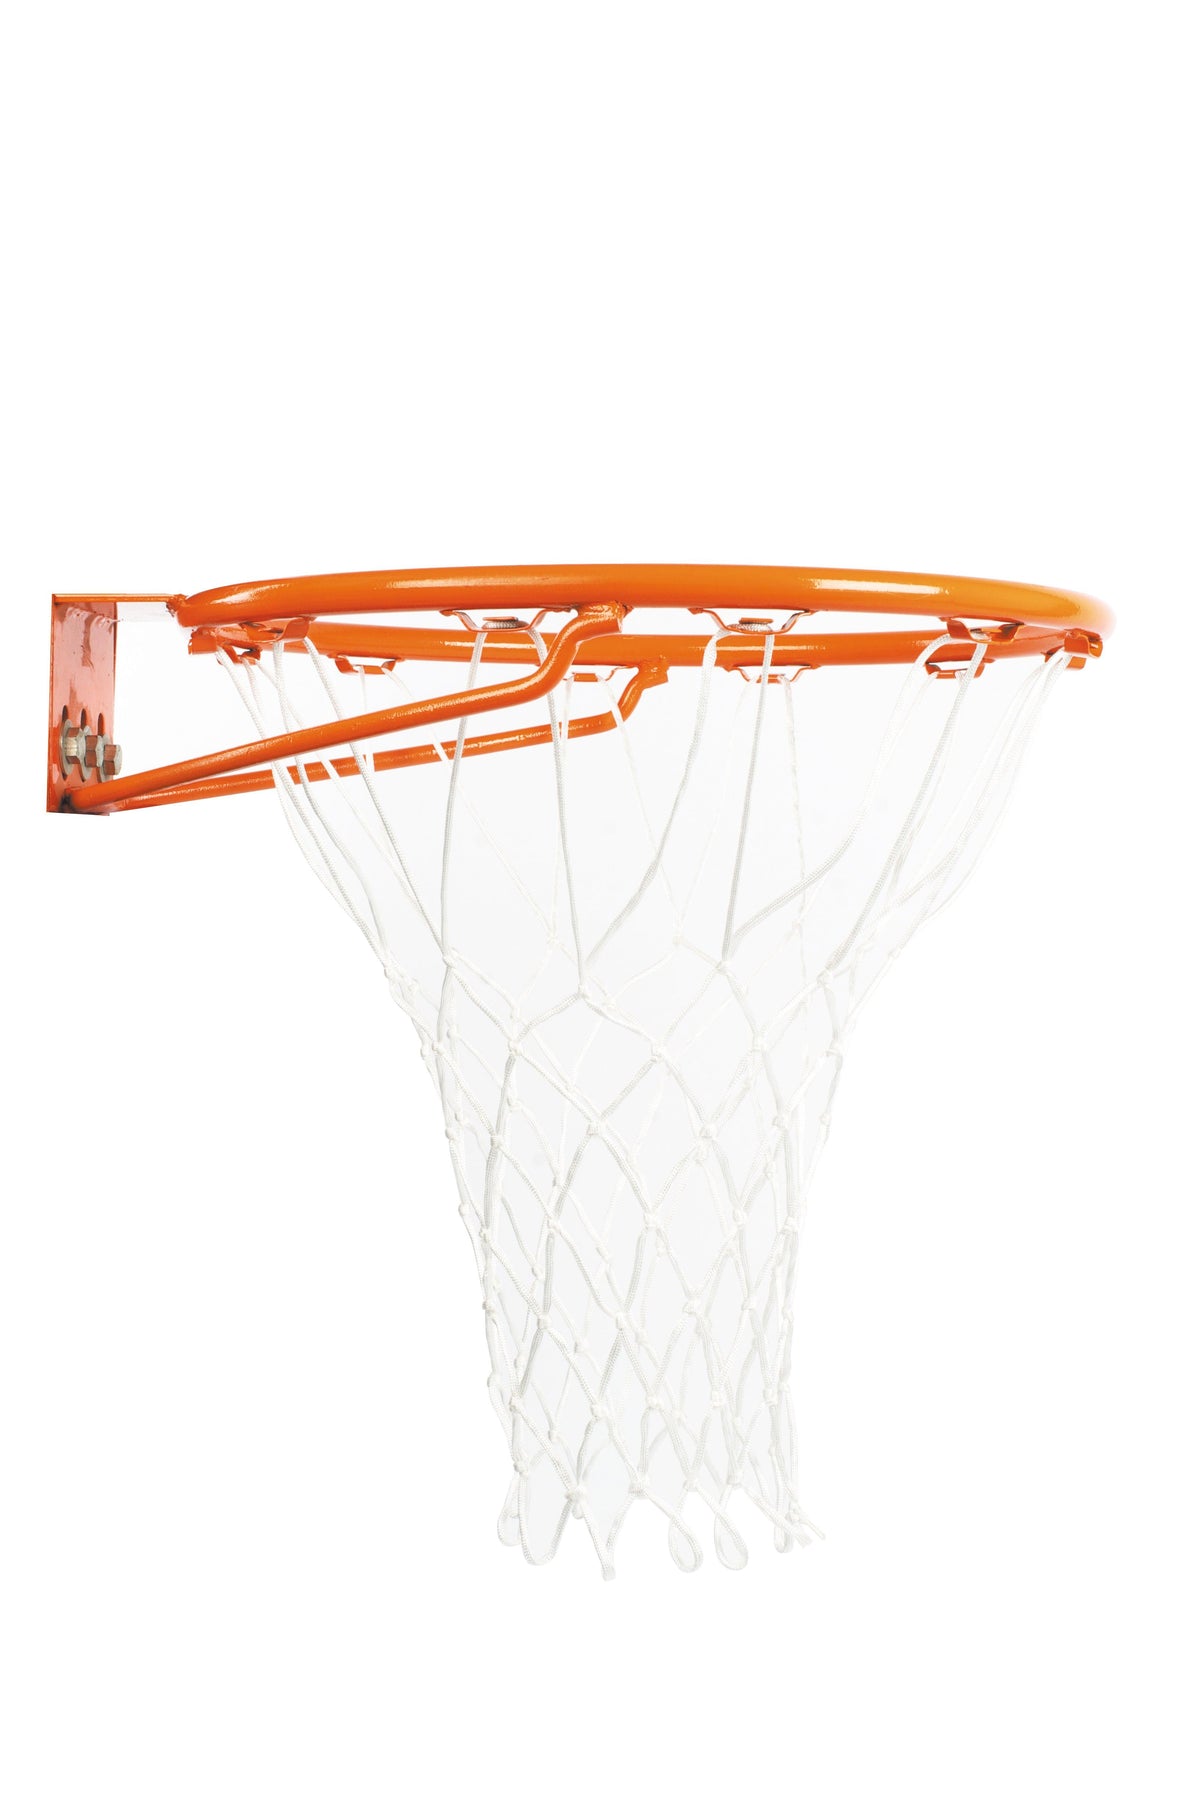 REPLACEMENT BASKETBALL NETS - Marcotte Sports Inc